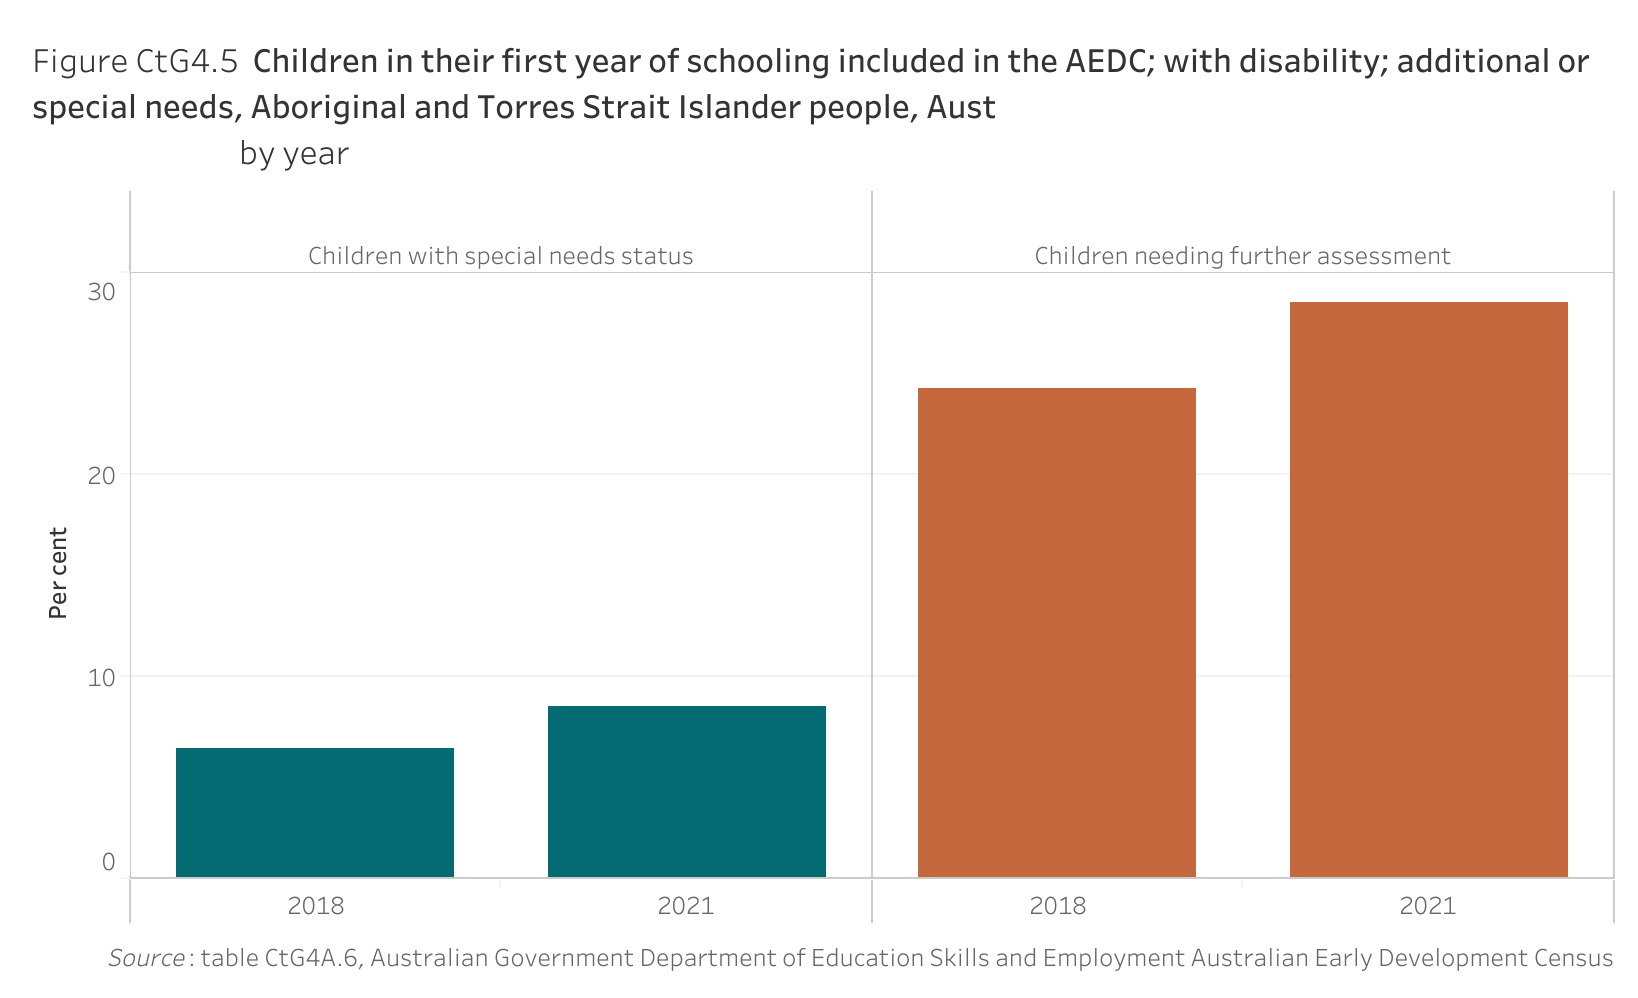 Figure CtG4.5. Bar chart showing the proportion of Aboriginal and Torres Strait Islander Children in their first year of schooling included in the Australian Early Development Census (AEDC) in Australia; with disability; additional or special needs, by year. Data table of figure CtG4.5 is below.